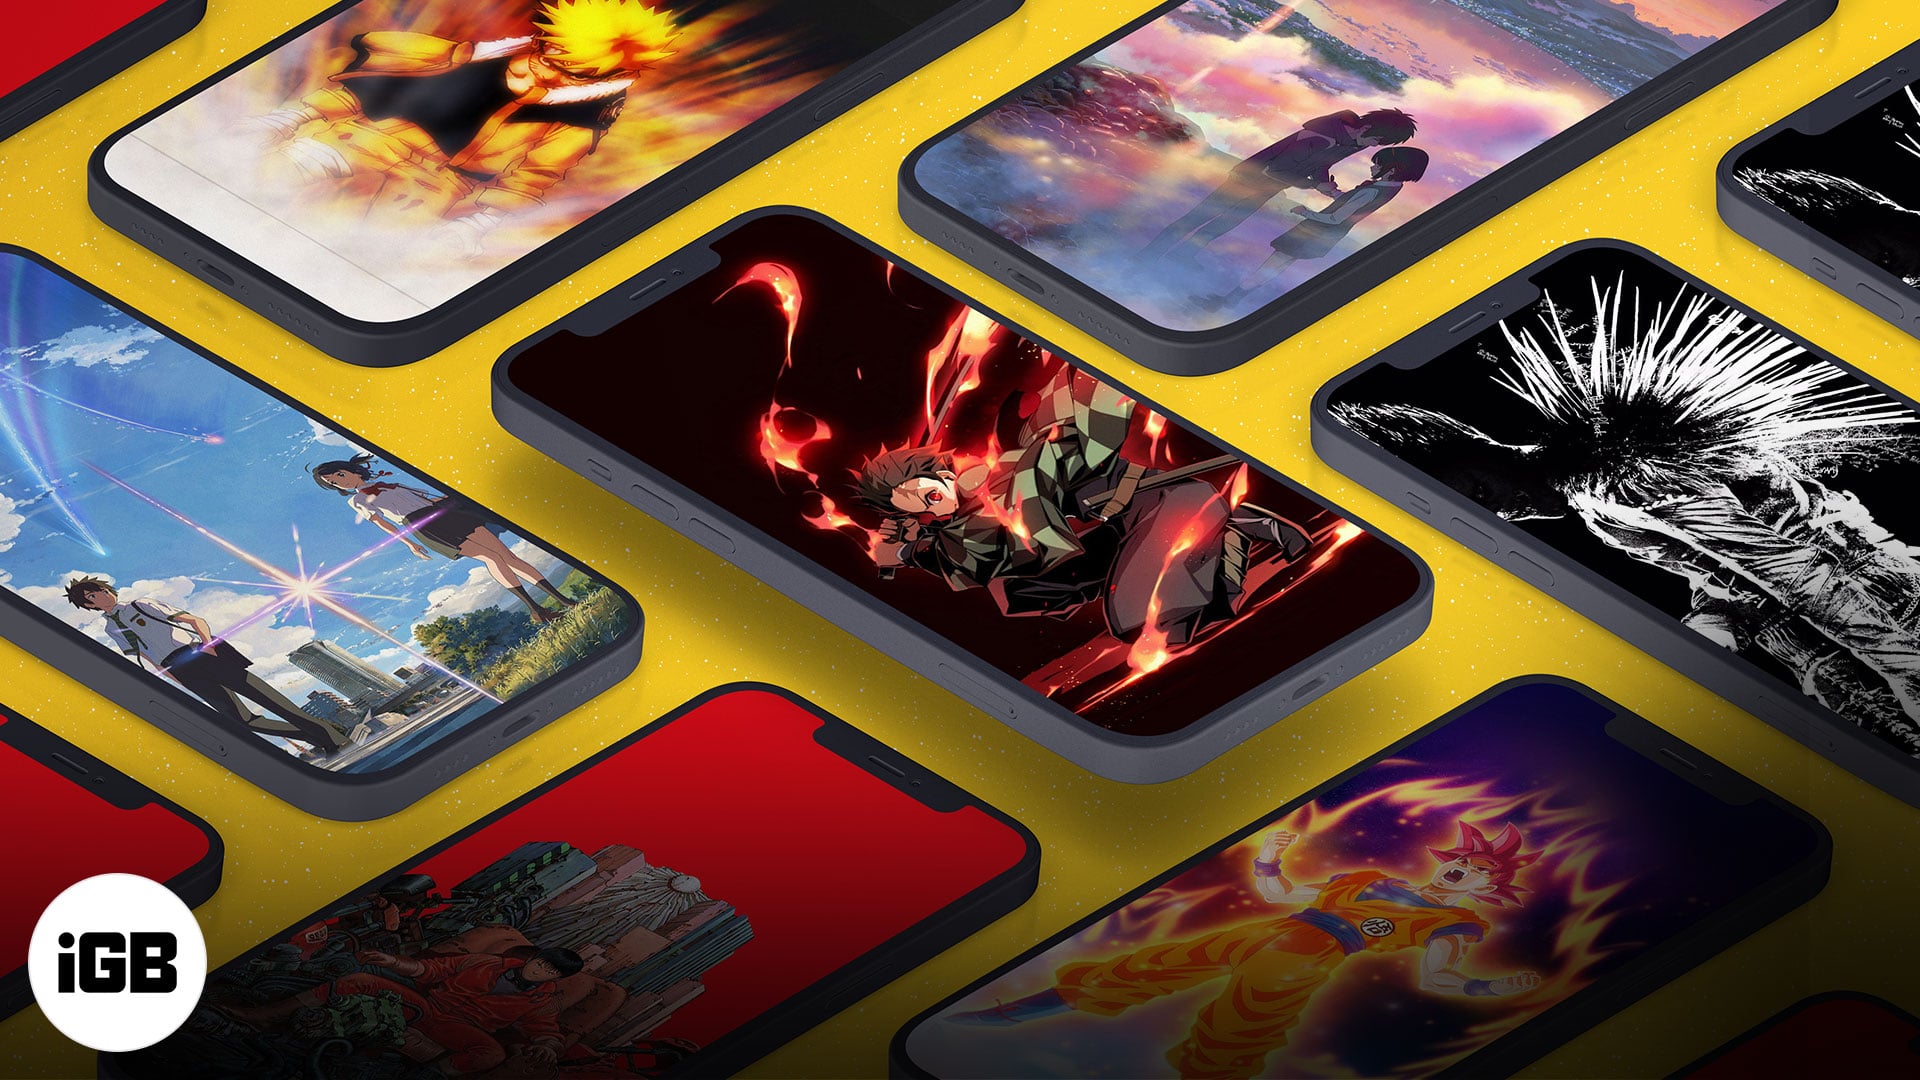 13 Free anime wallpapers for iPhone in